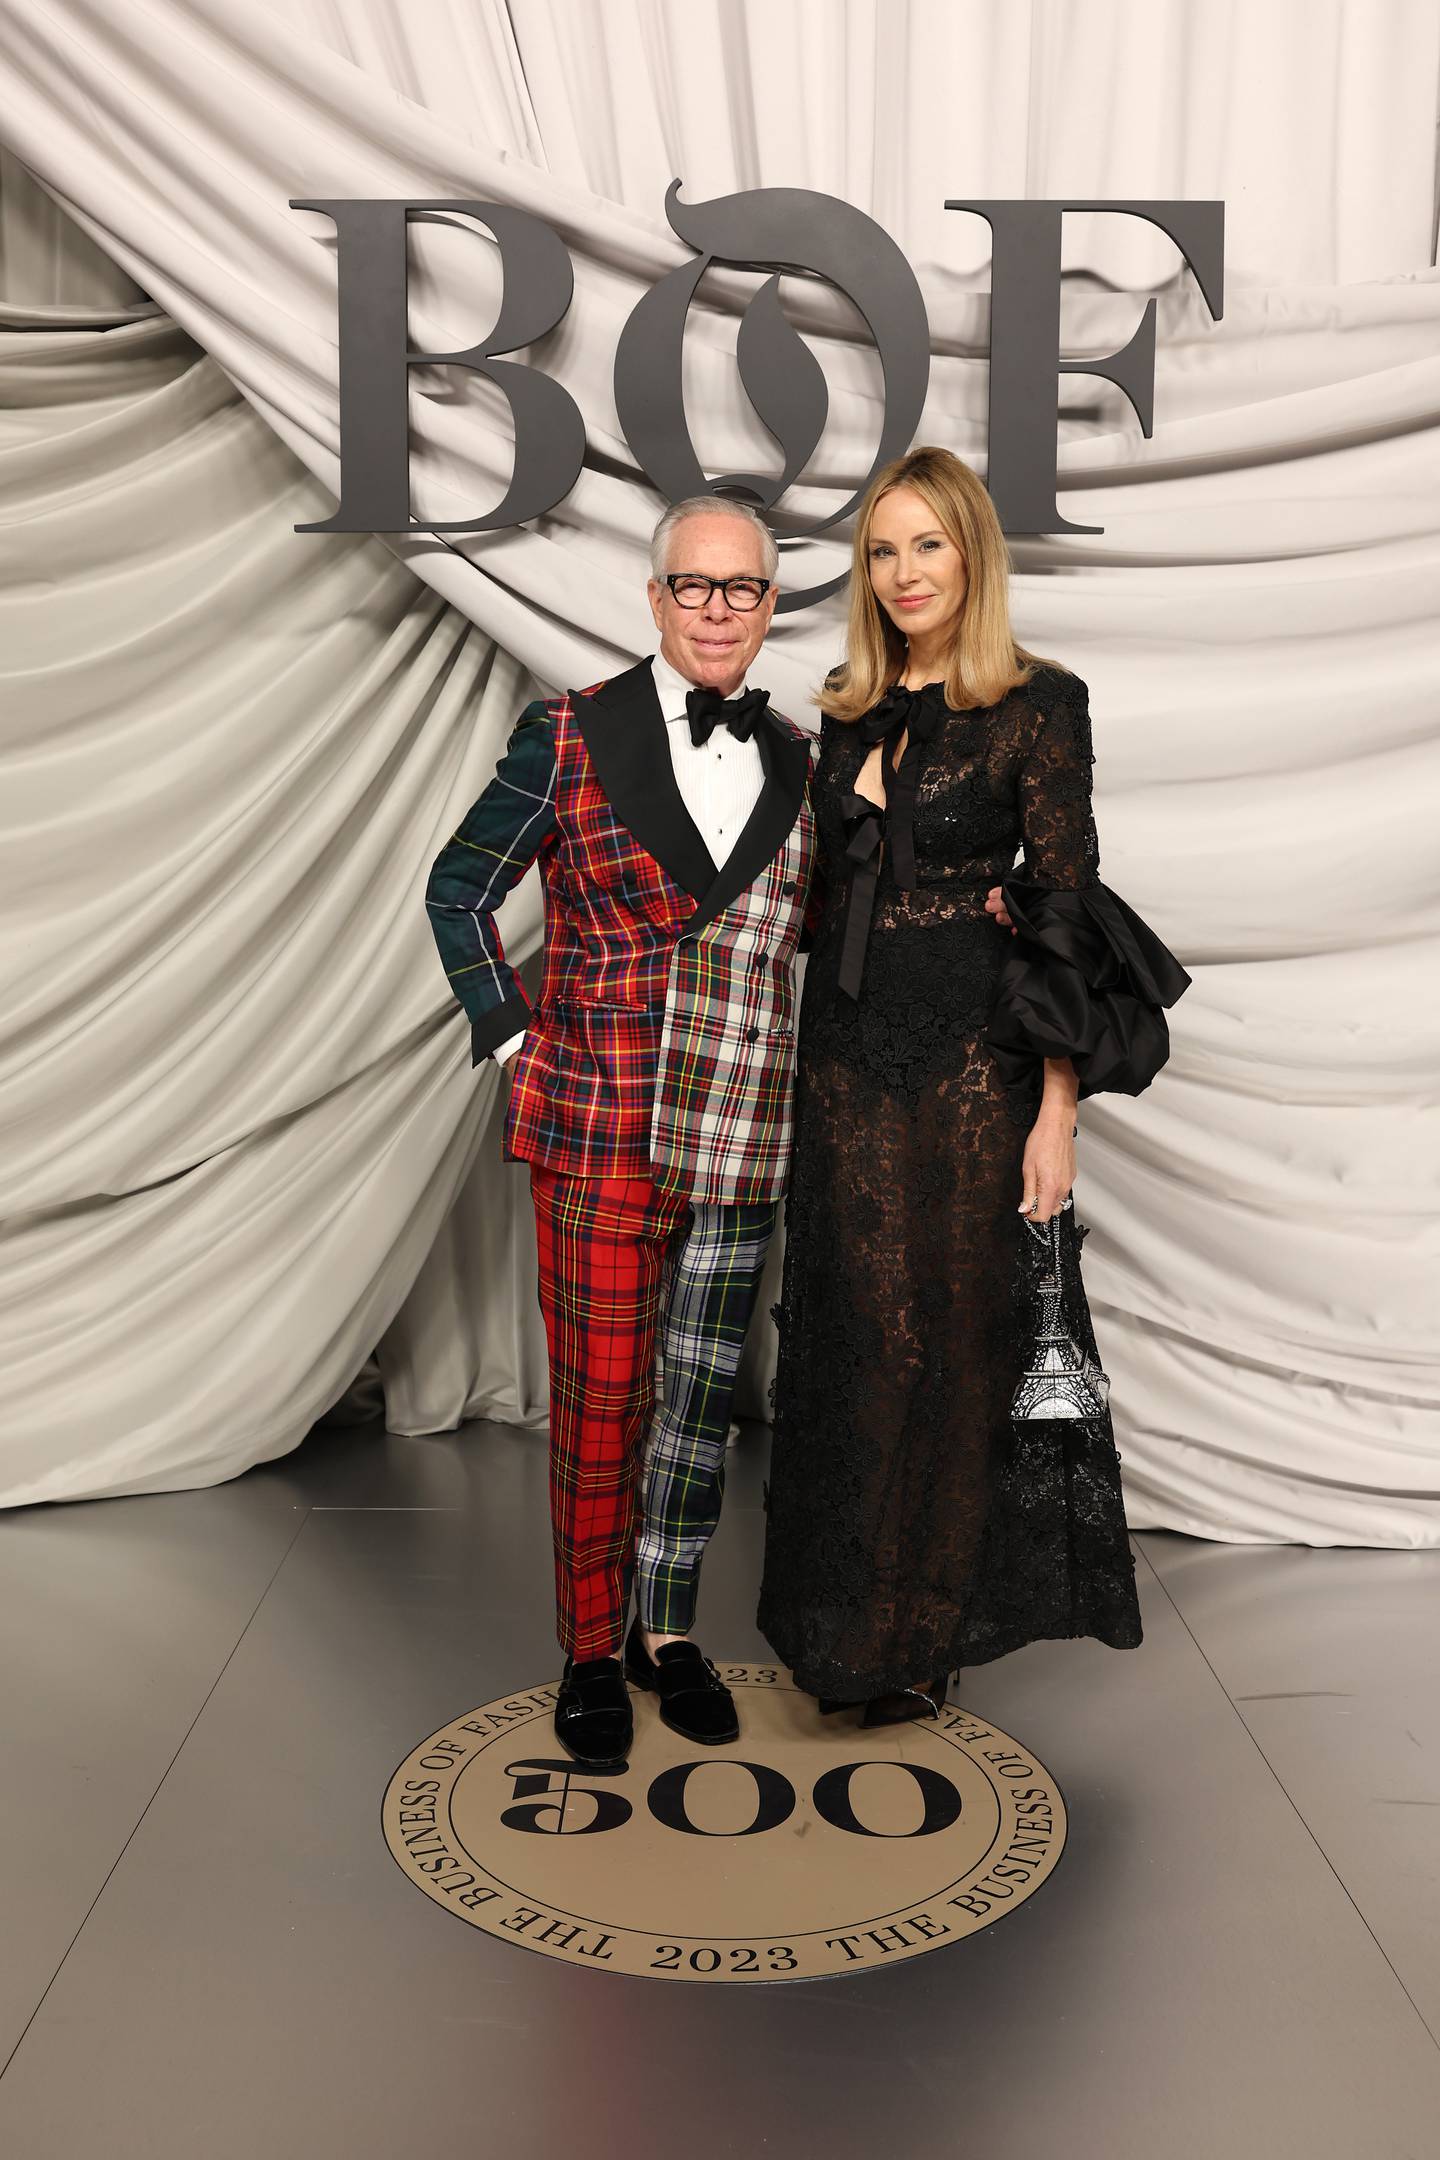 Tommy Hilfiger and Dee Hilfiger attend the #BoF500 Gala during Paris Fashion Week at Shangri-La Hotel Paris on September 30, 2023 in Paris, France.